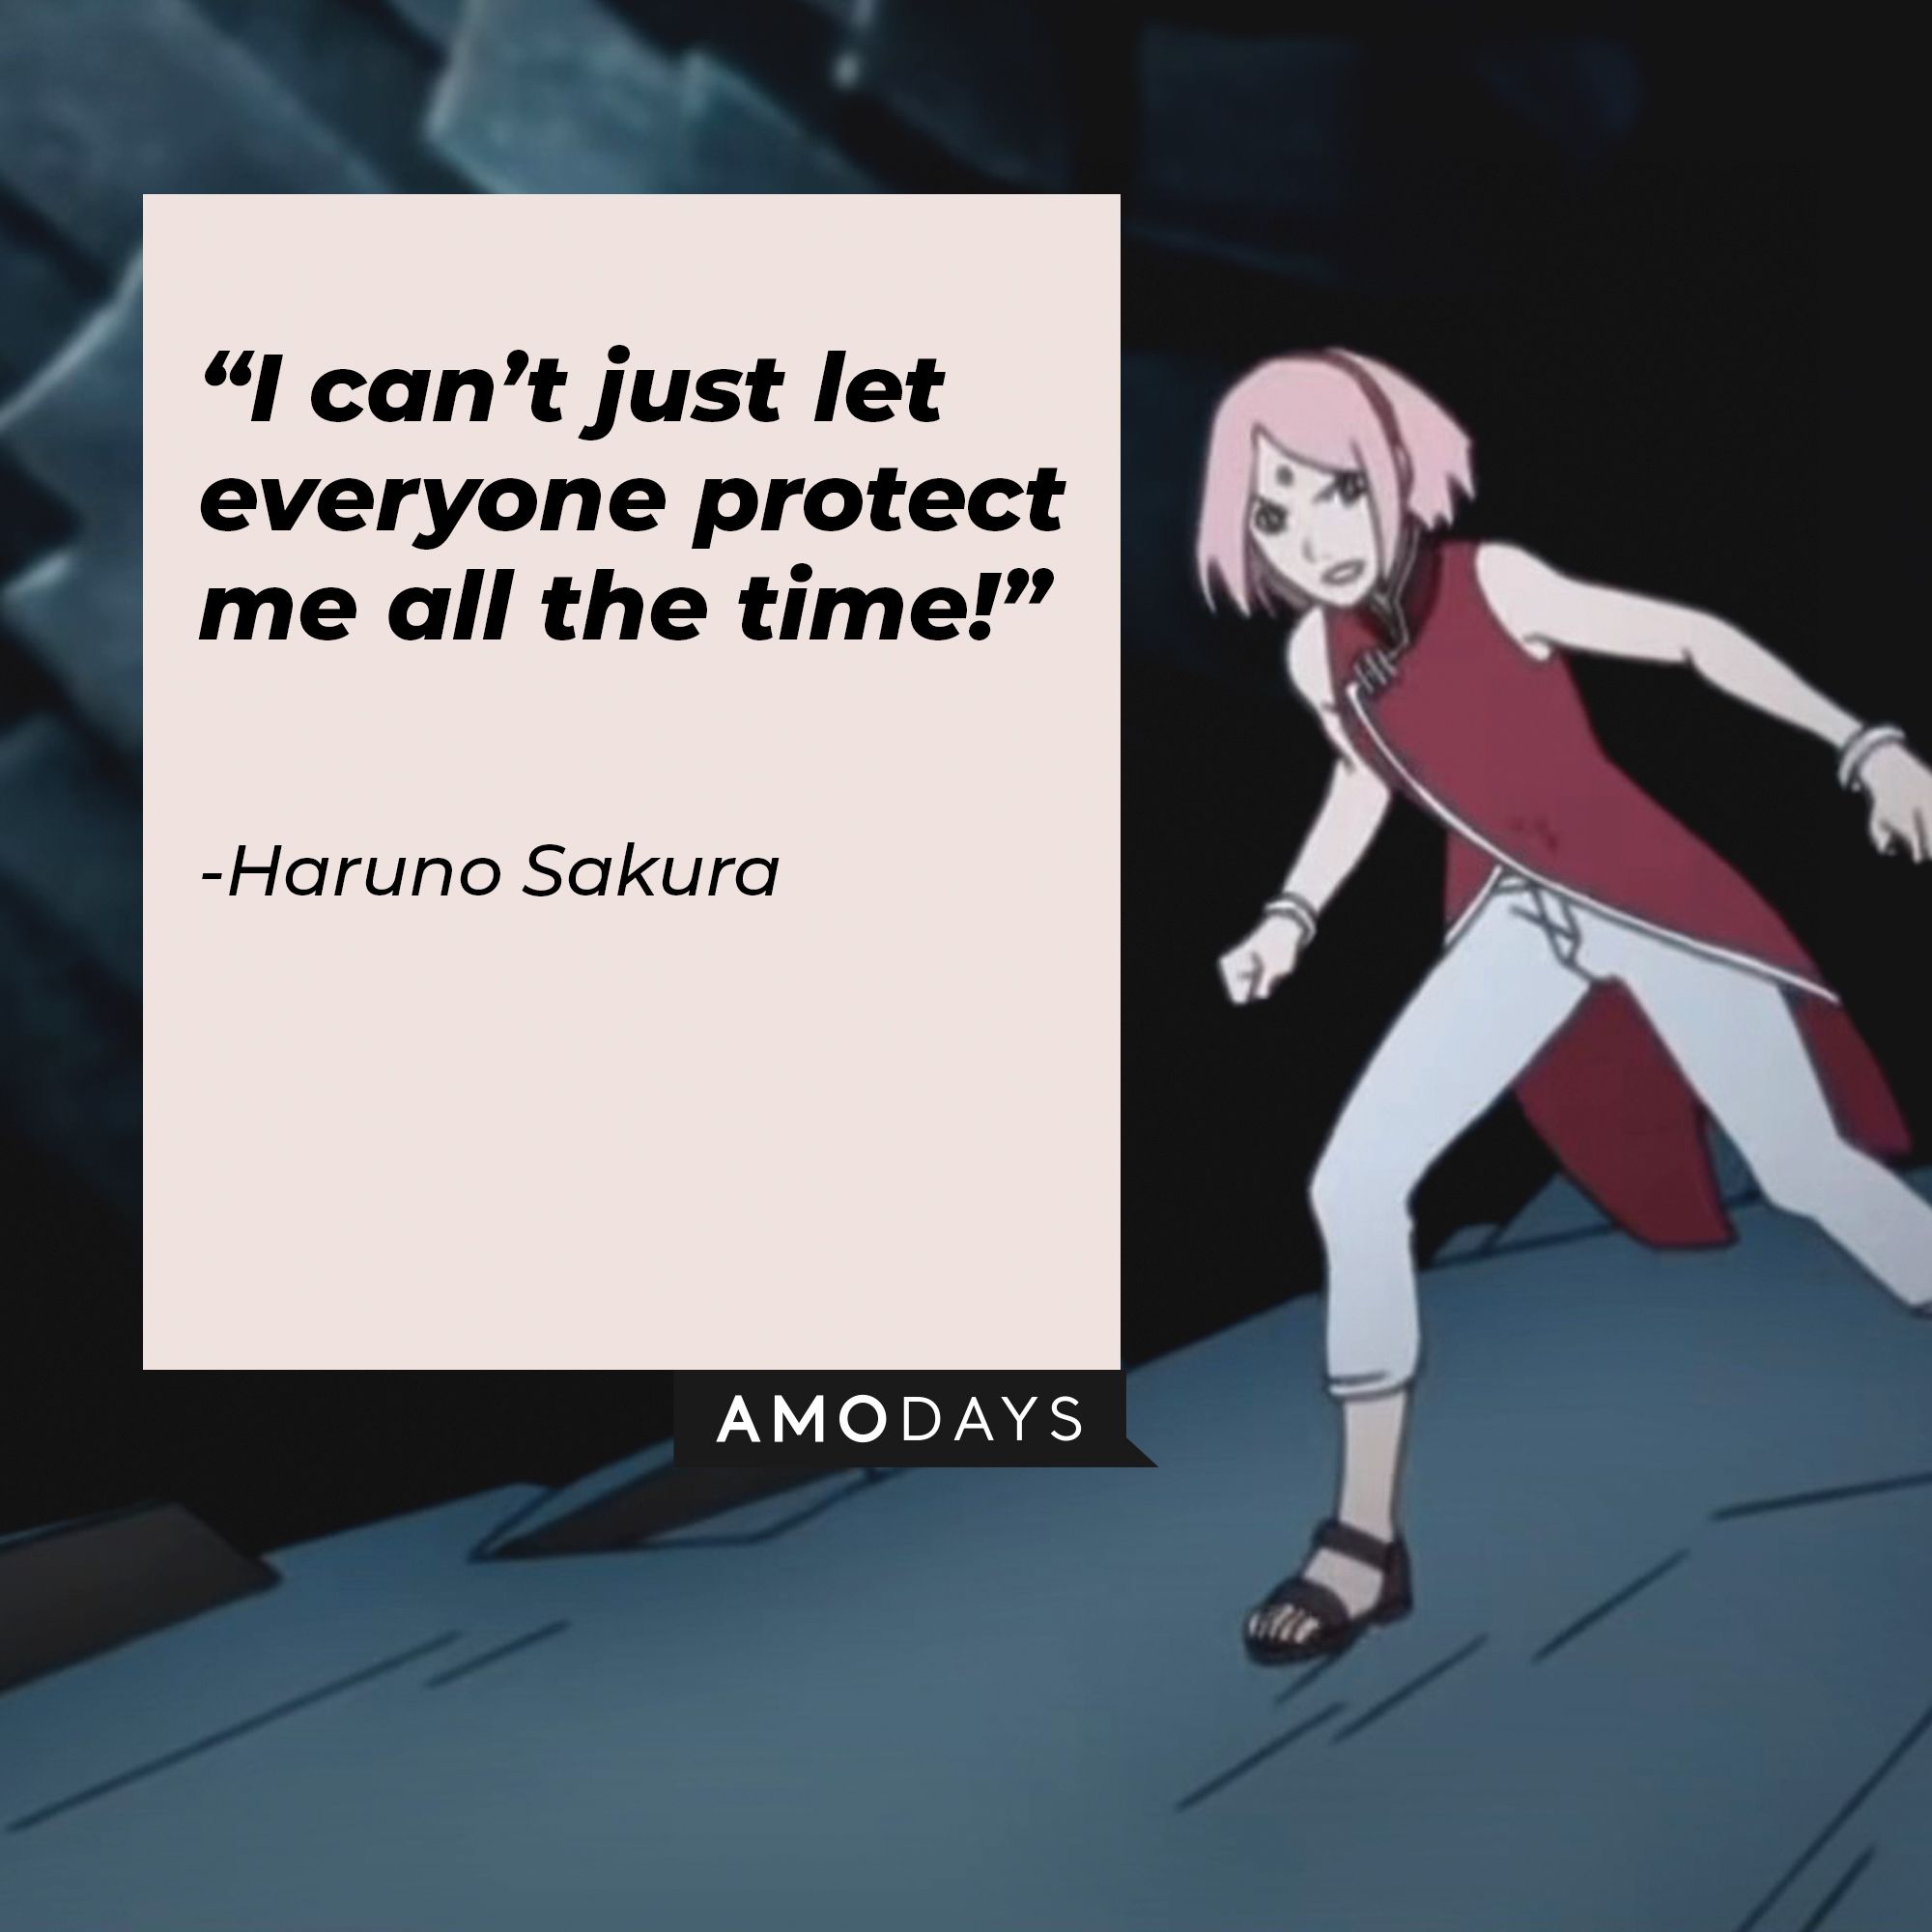 Haruno Sakura’s quote: “I can’t just let everyone protect me all the time!” | Source: facebook.com/narutoofficialsns